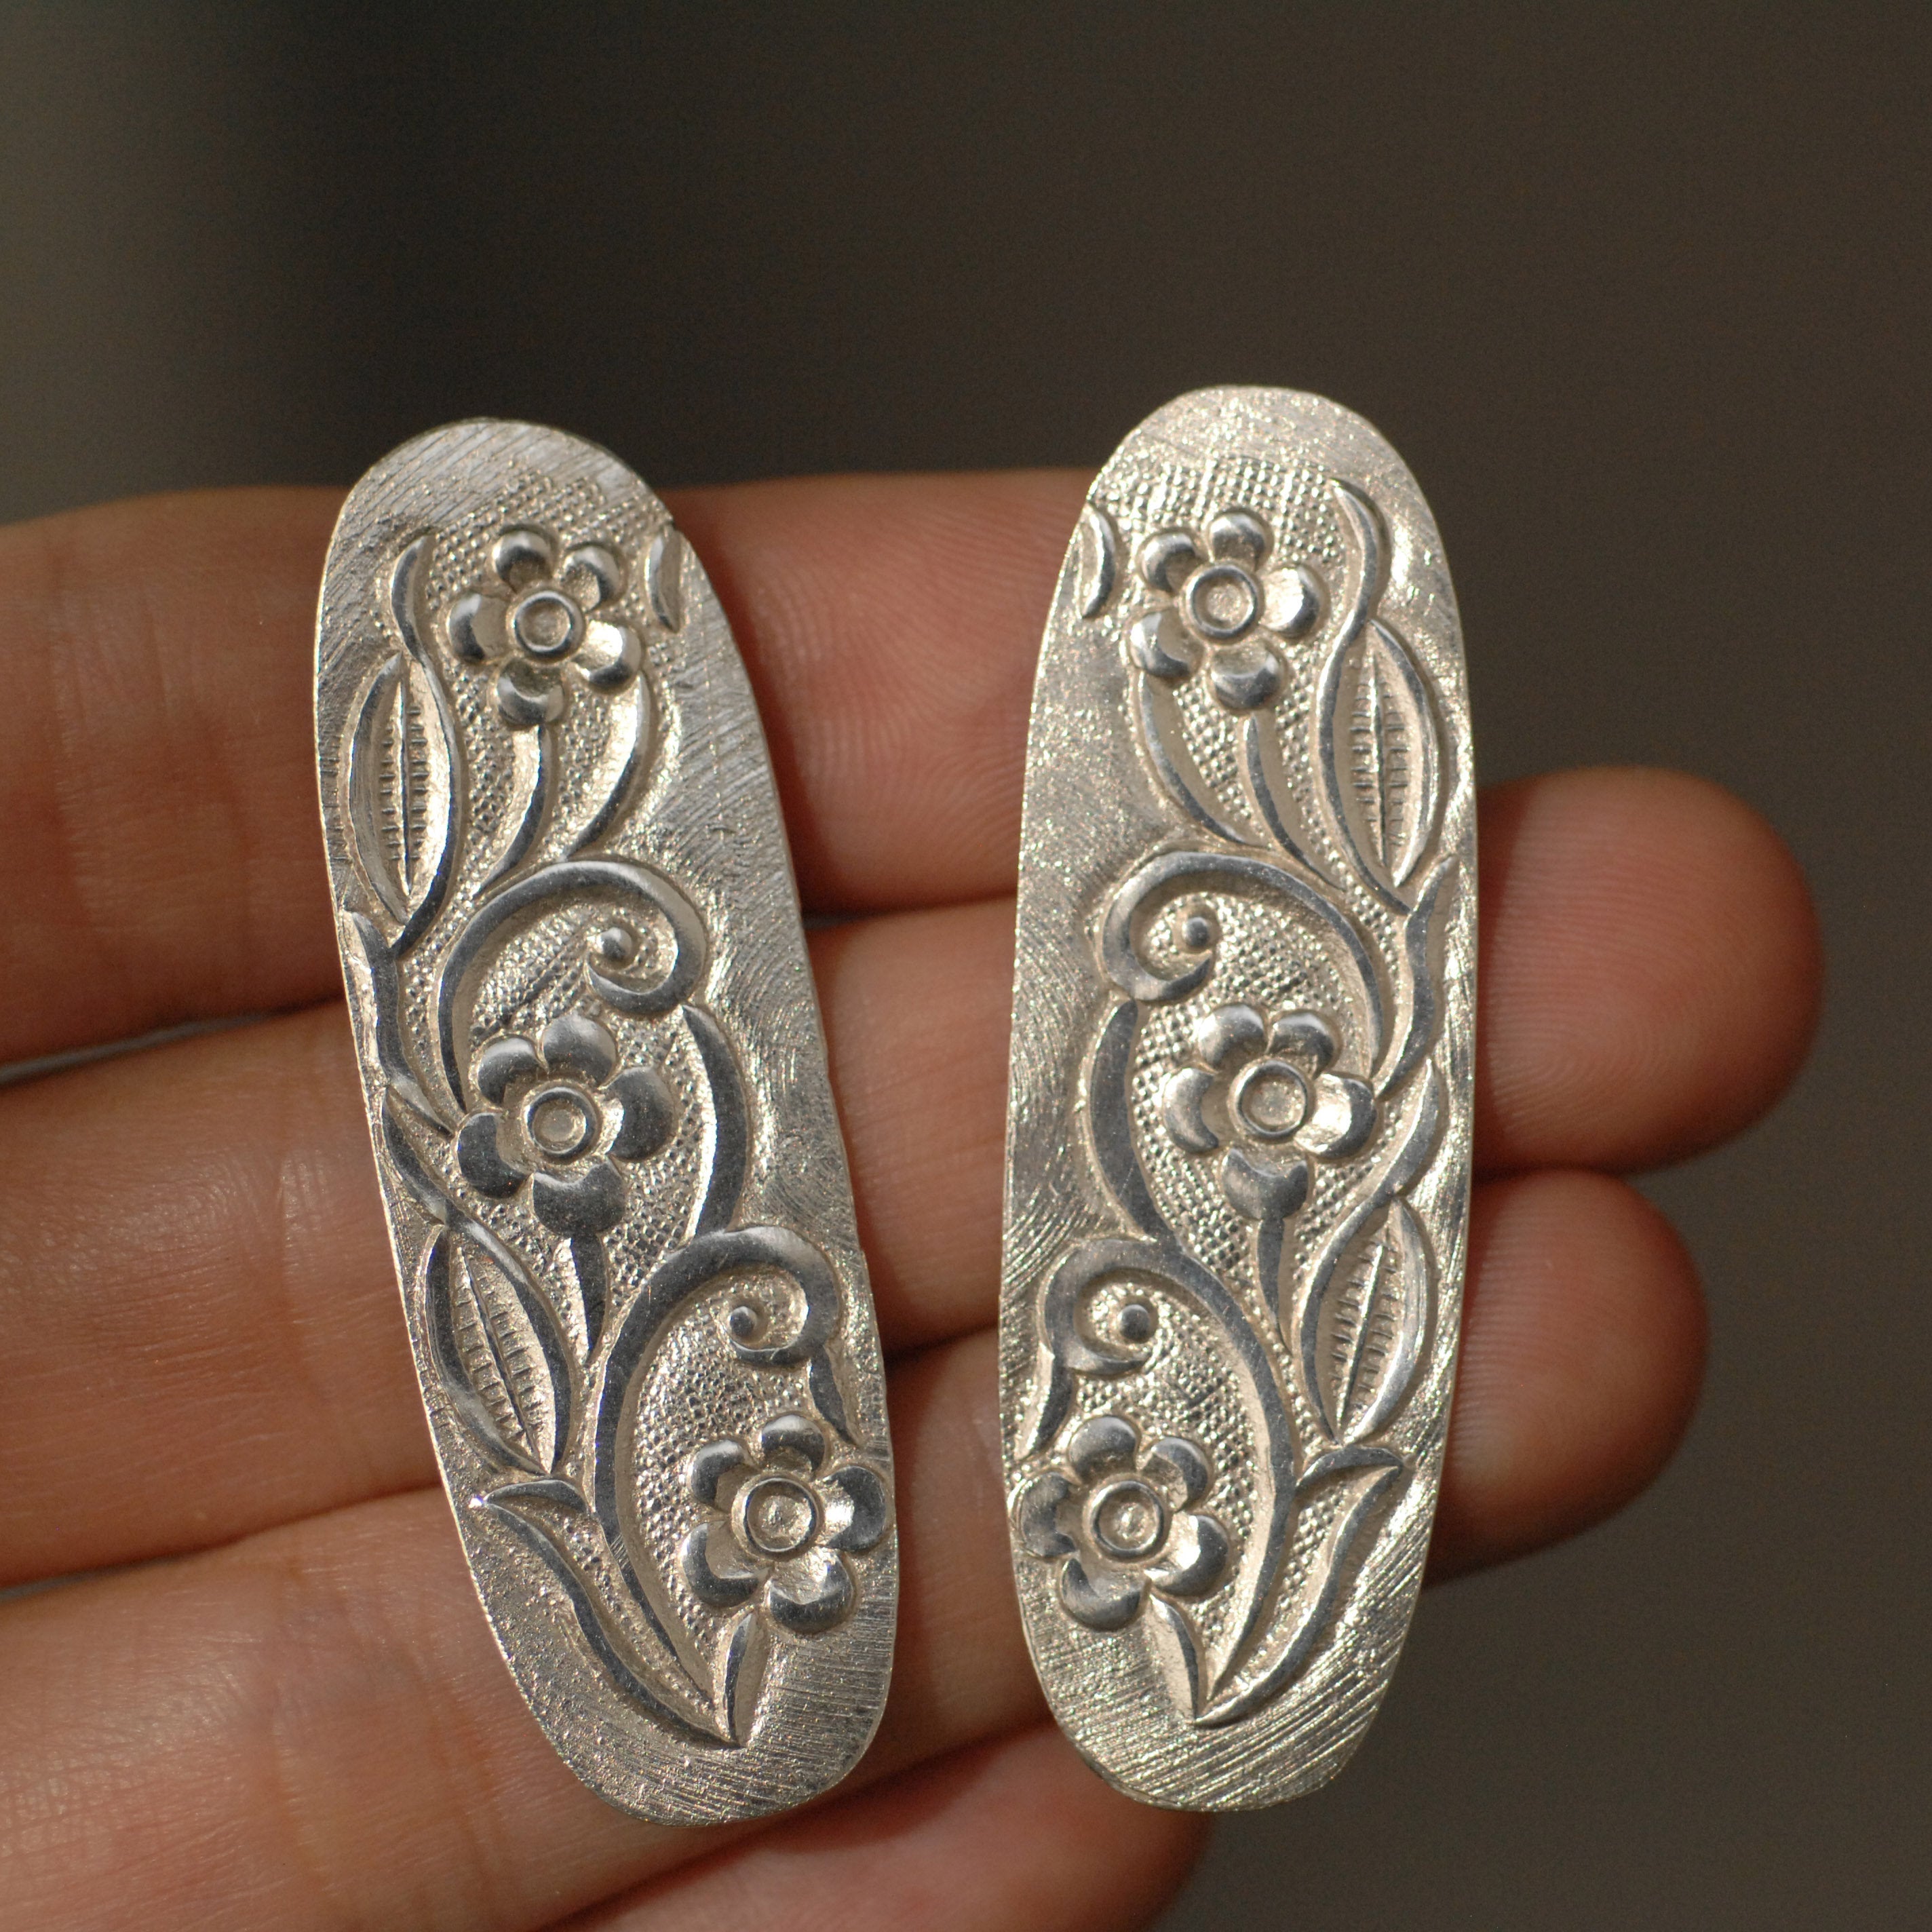 Freeform oval shapes w/ floral texture metal blanks - Sterling silver